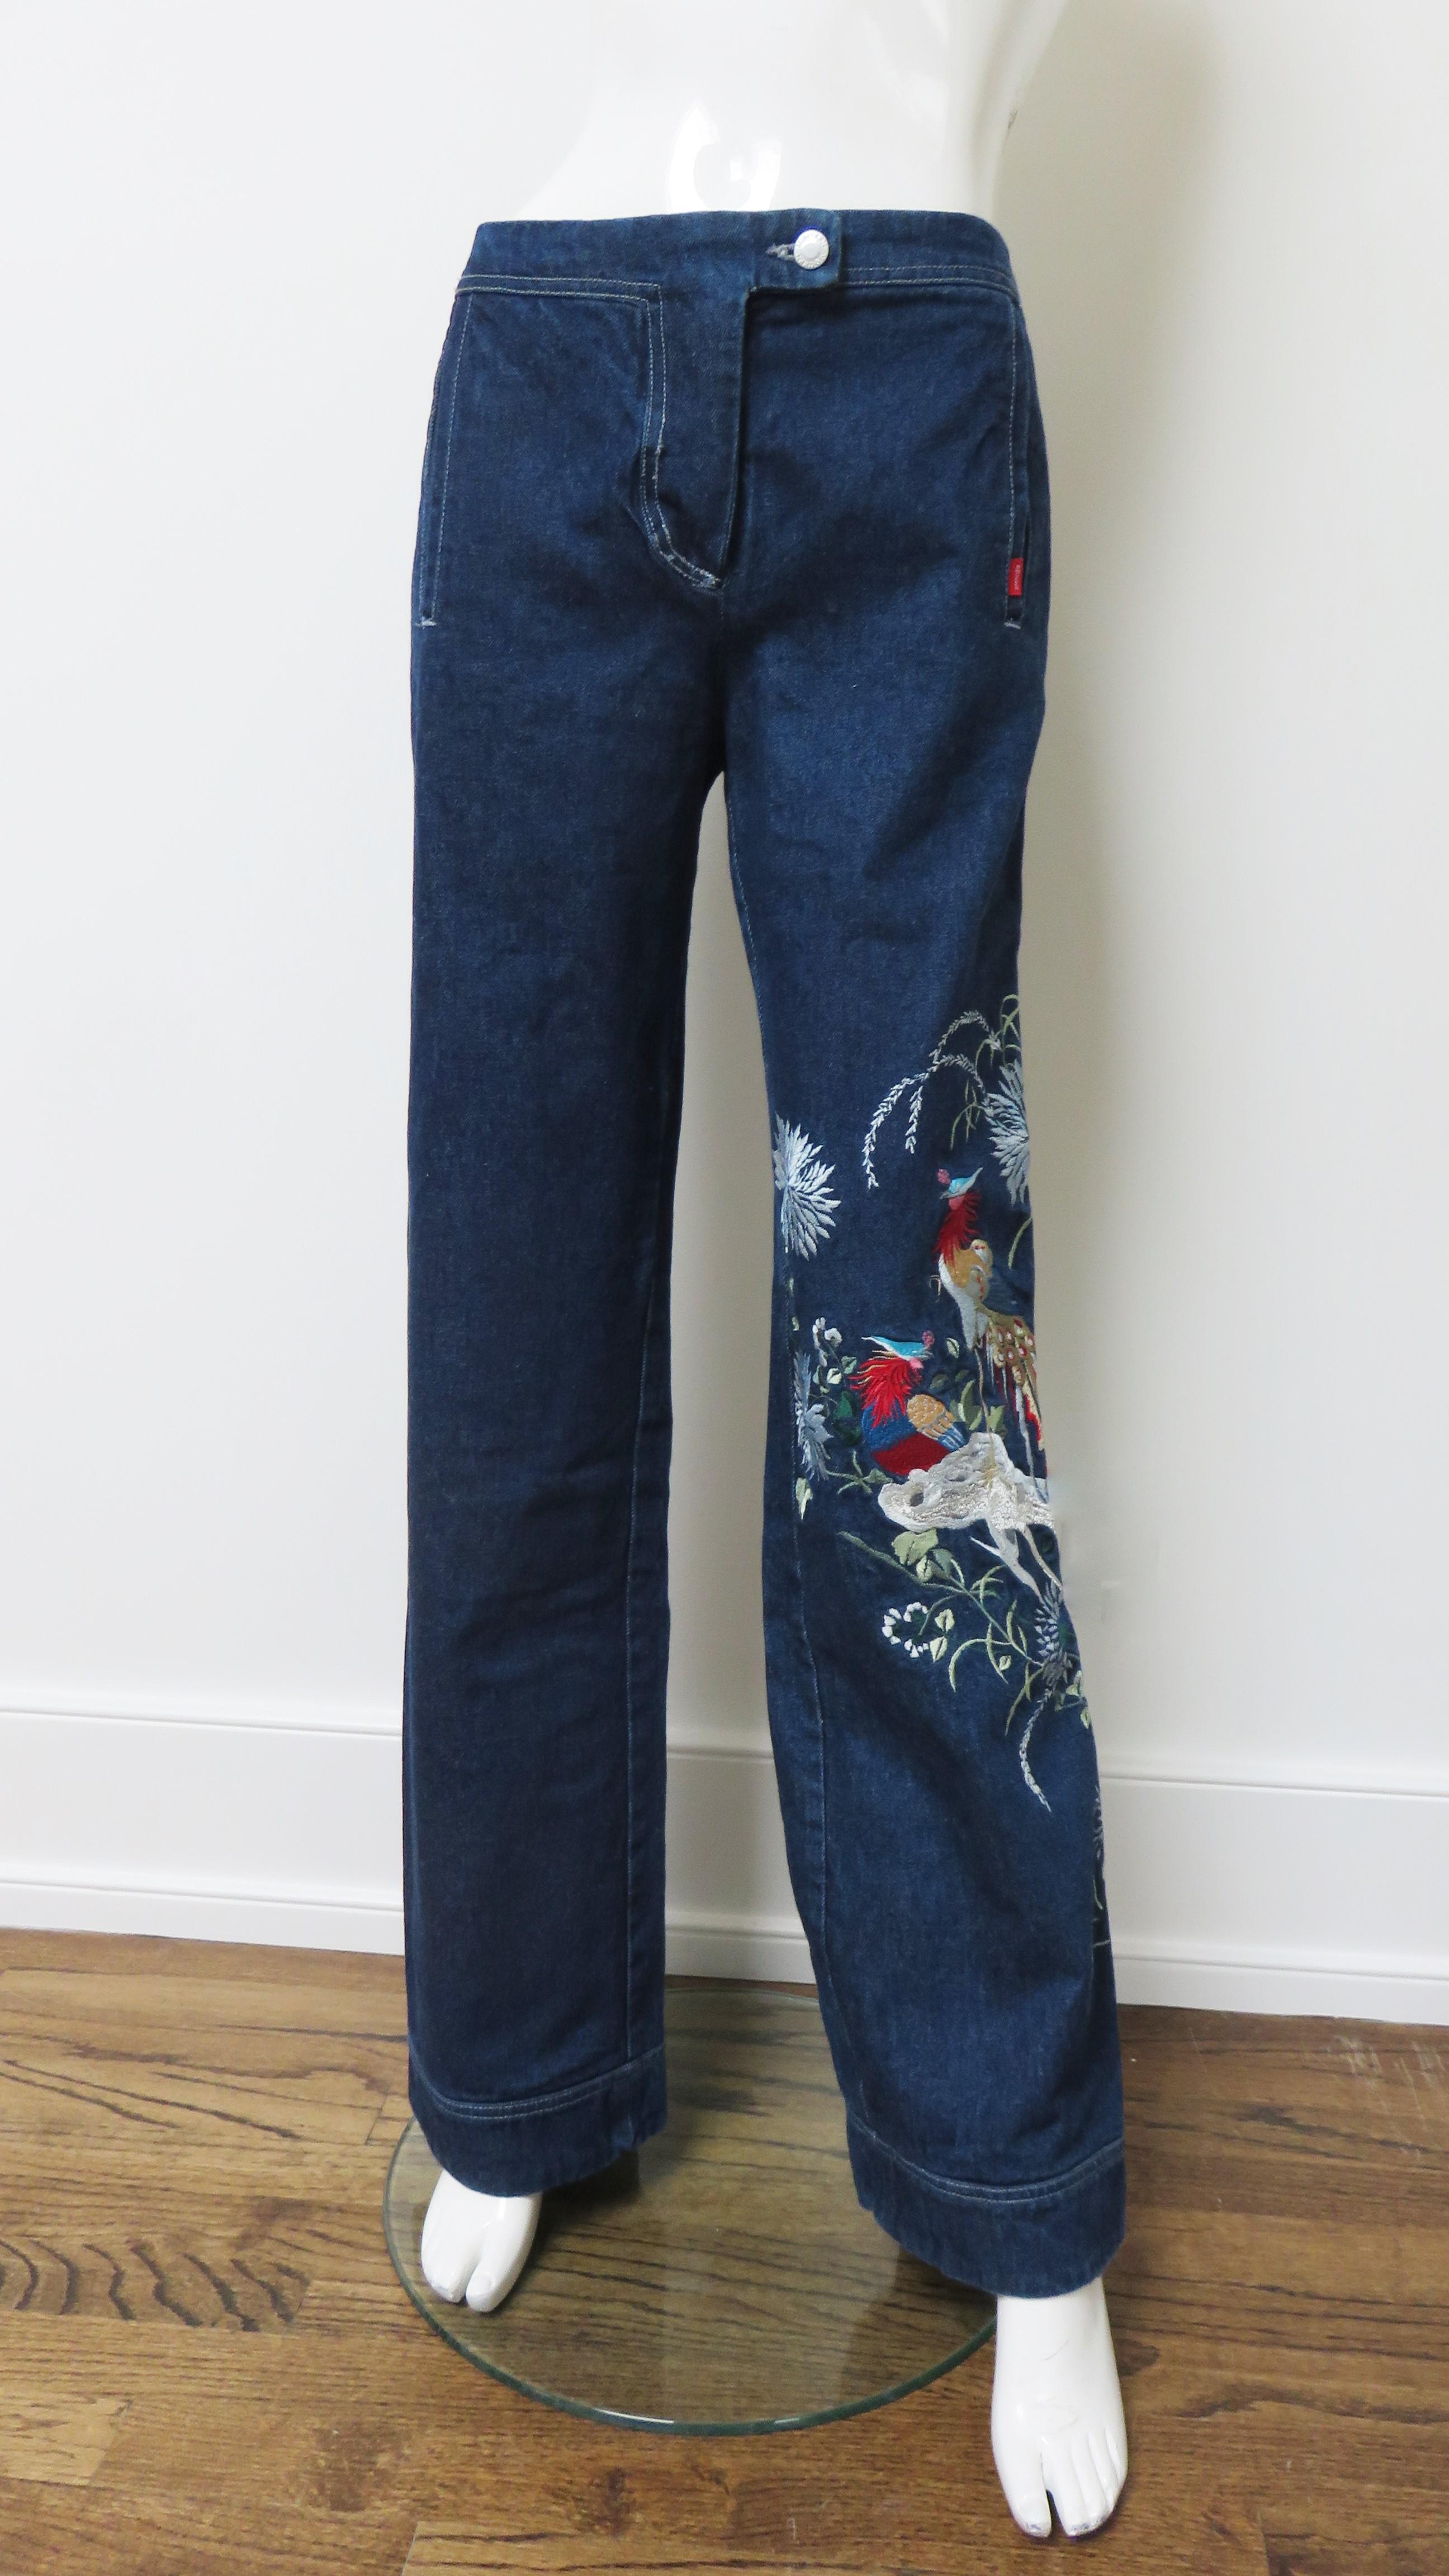 jeans with flowers on them